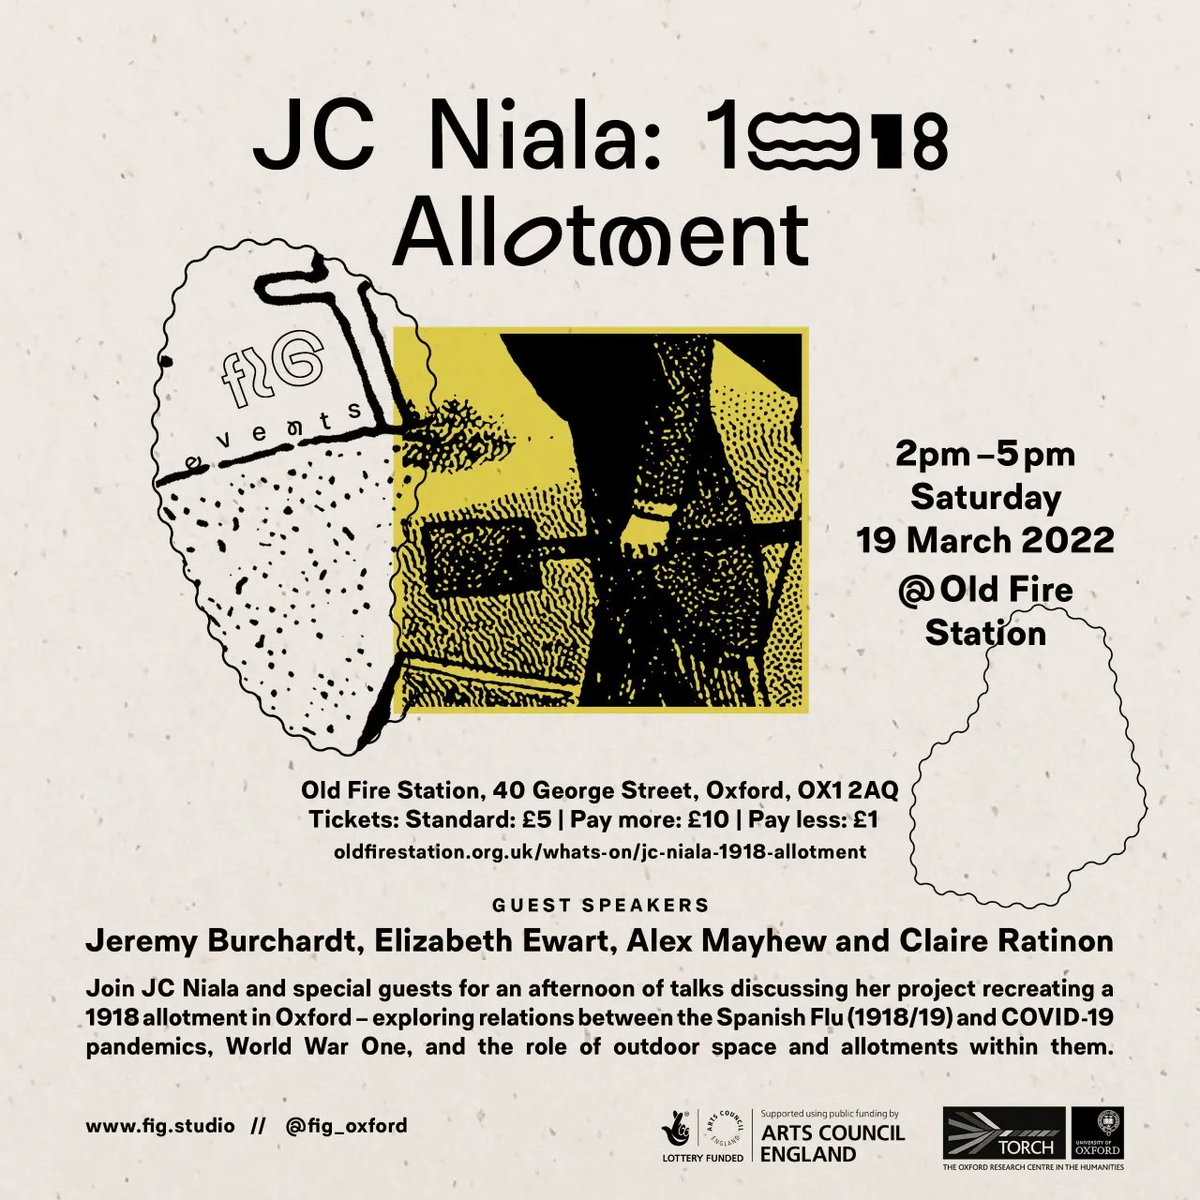 Happening this Saturday! 

Join @jcniala and special guests for an afternoon of talks on range of topics, including the history of allotments, gardening in the trenches, and growing practices during the pandemic. 🌱 @fig_oxford

Book - buff.ly/35zO2Jr